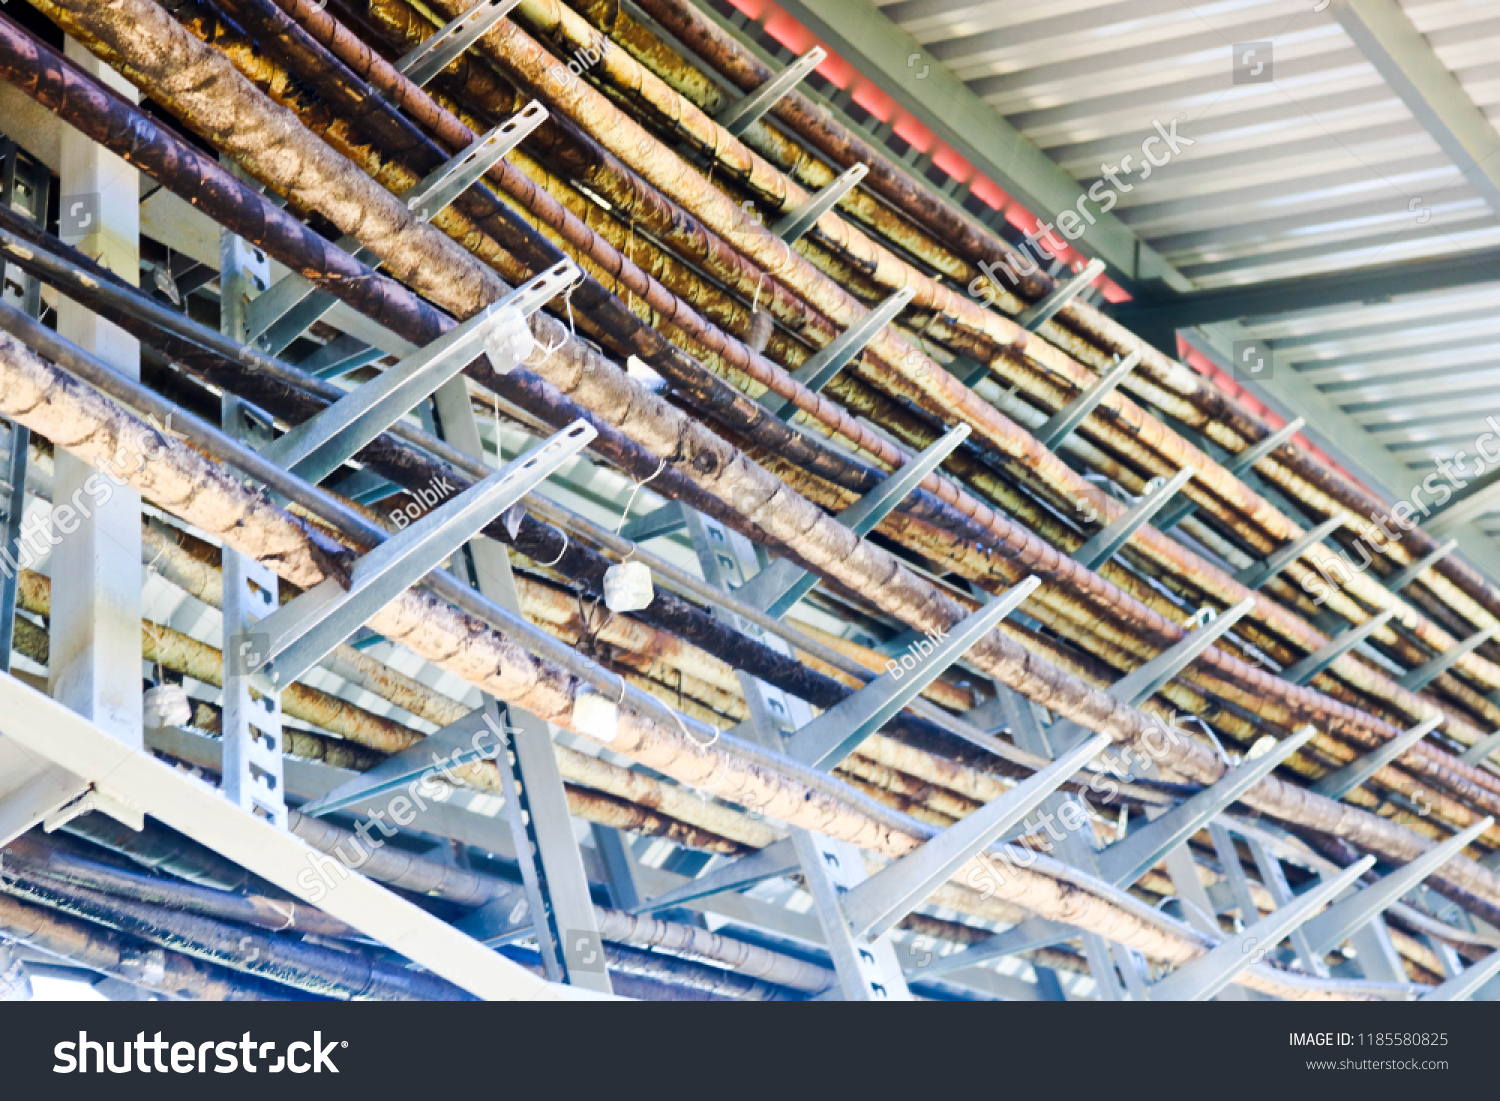 Metal wires in a bunch. Technological tubes on metal stands with tin labels. On the chemical production of unusual structures under the roof. Complex communications. Multicolored metal structures. #1185580825